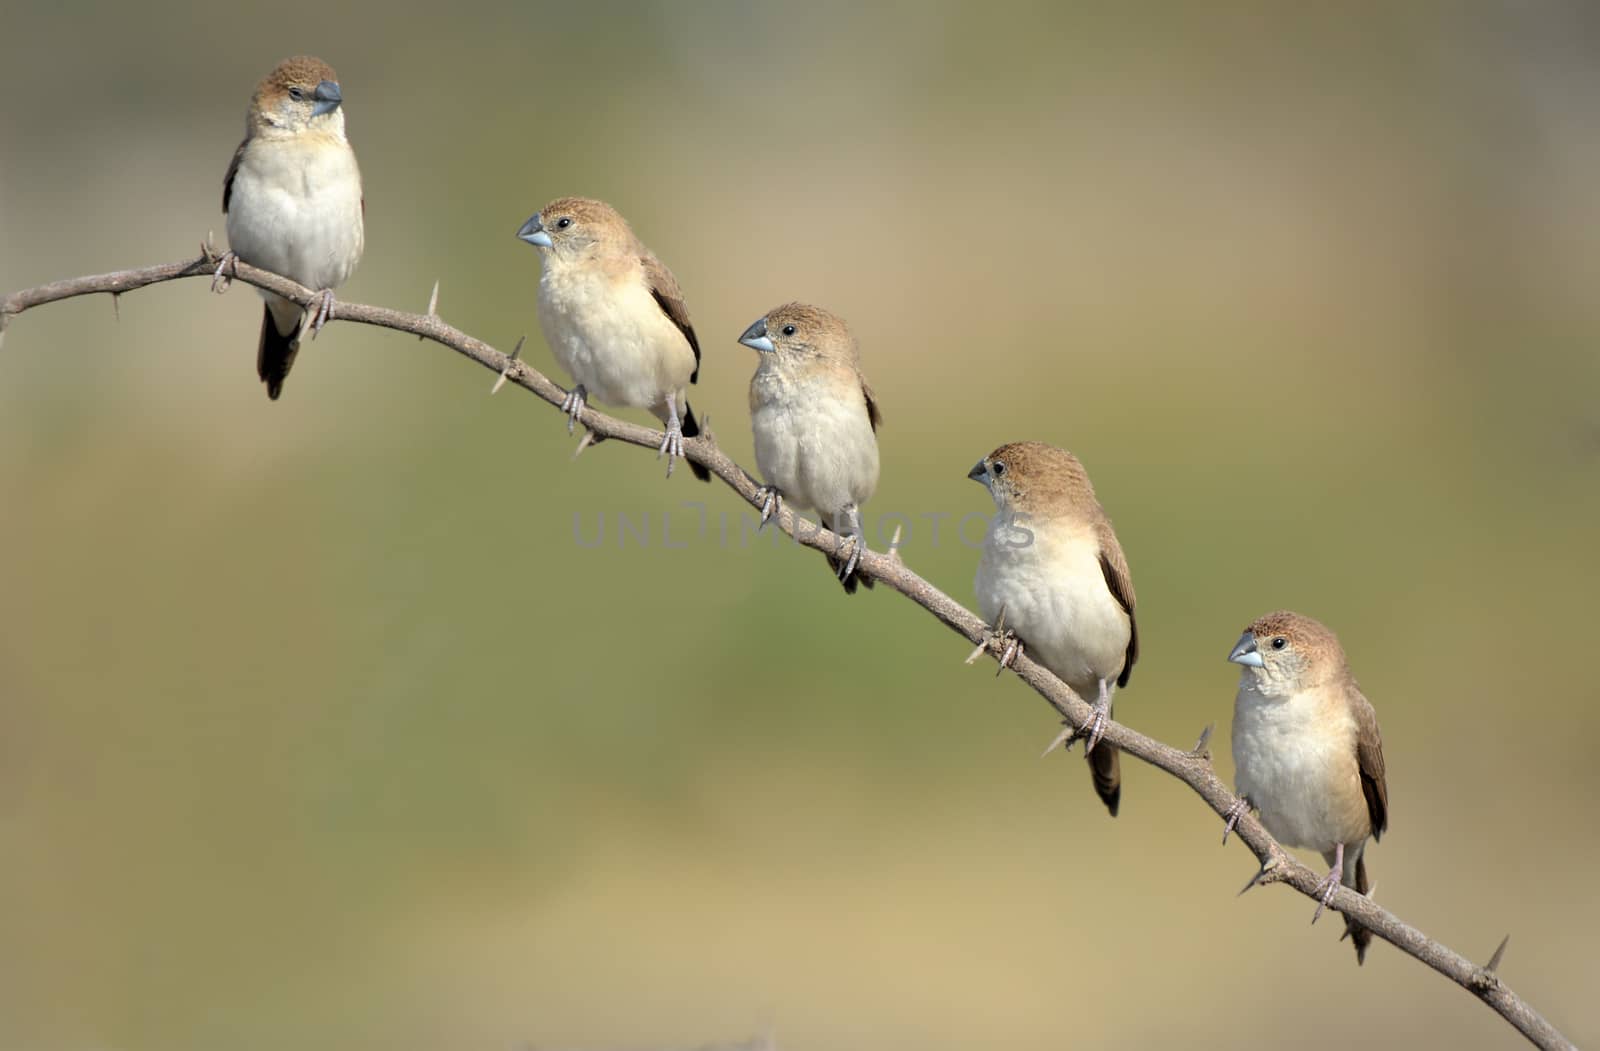 The Indian silverbill or white-throated munia is a small passerine bird found in the Indian Subcontinent and adjoining regions.